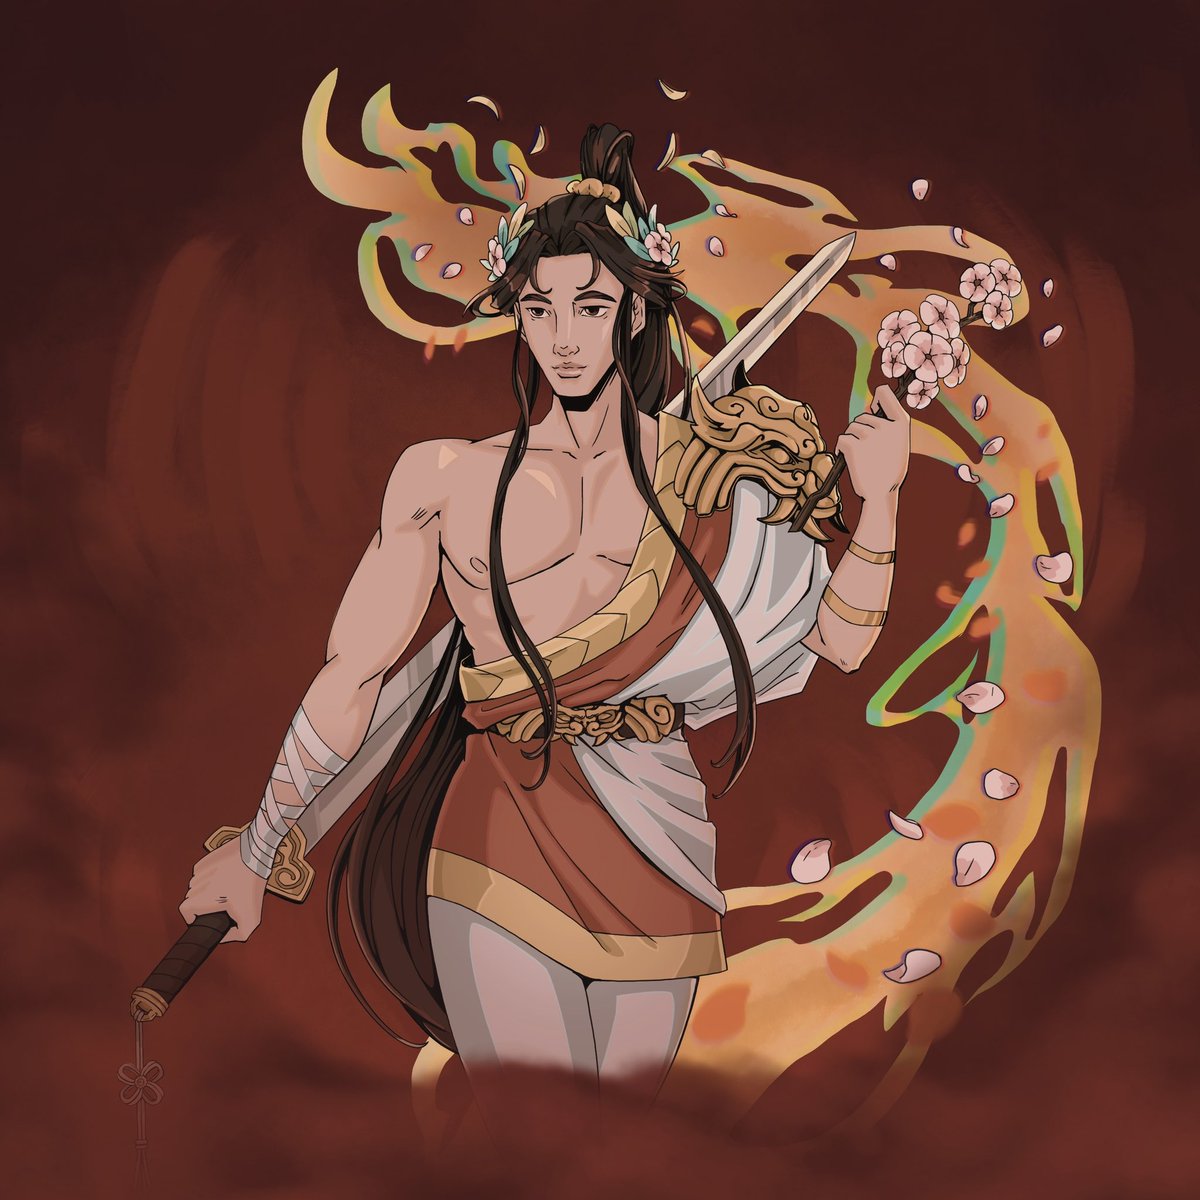 So…Xie Lian as Zagreus from Hades game?? Taizi Dianxia of the underworld?? I think that would be pretty cool ✨